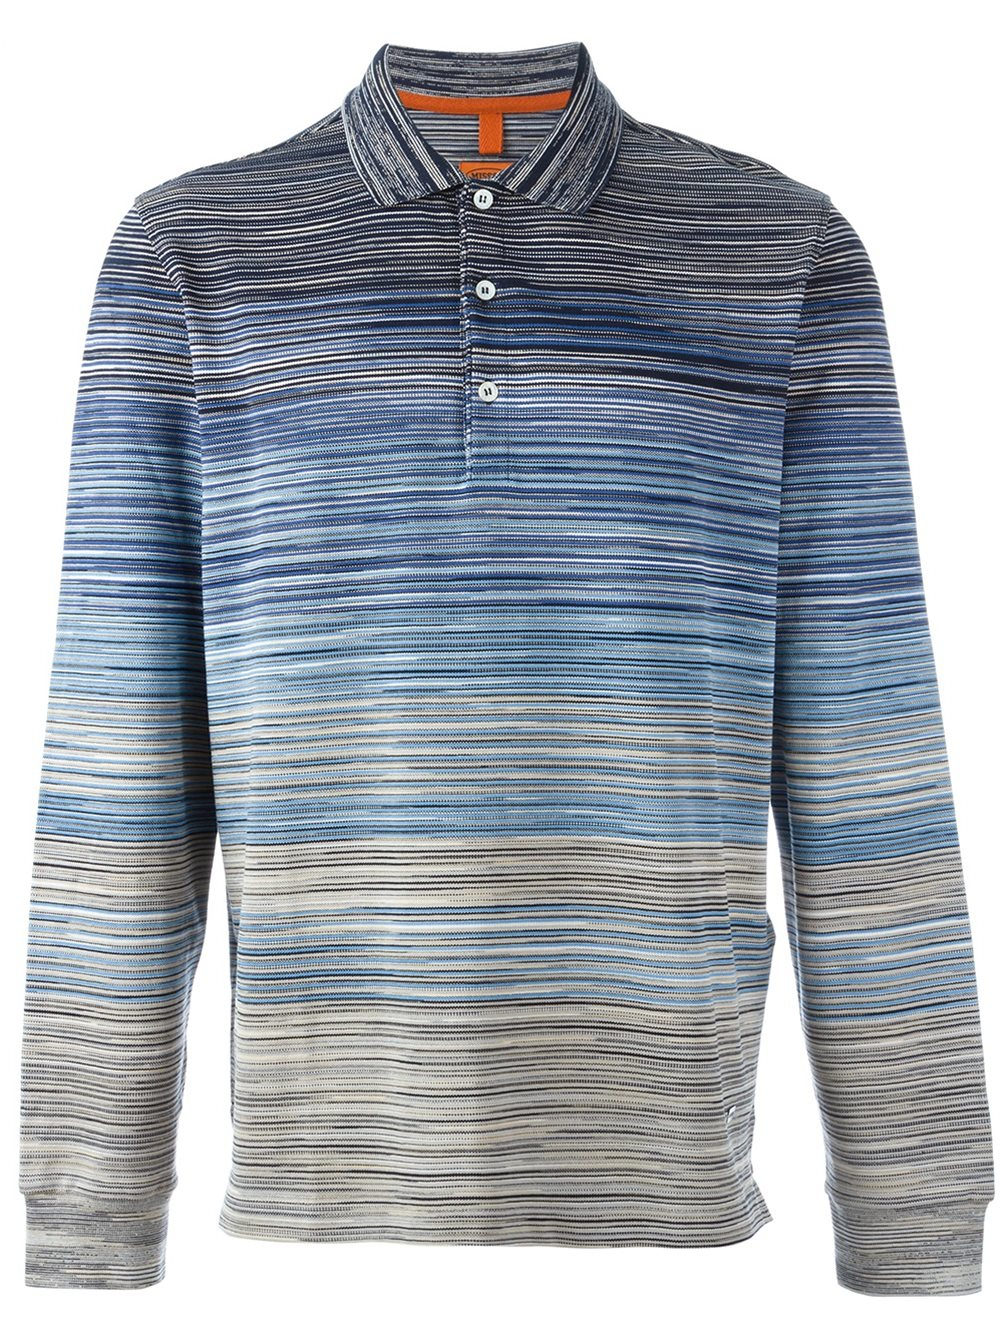 Missoni Gradient Striped Polo Shirt in Blue for Men - Lyst